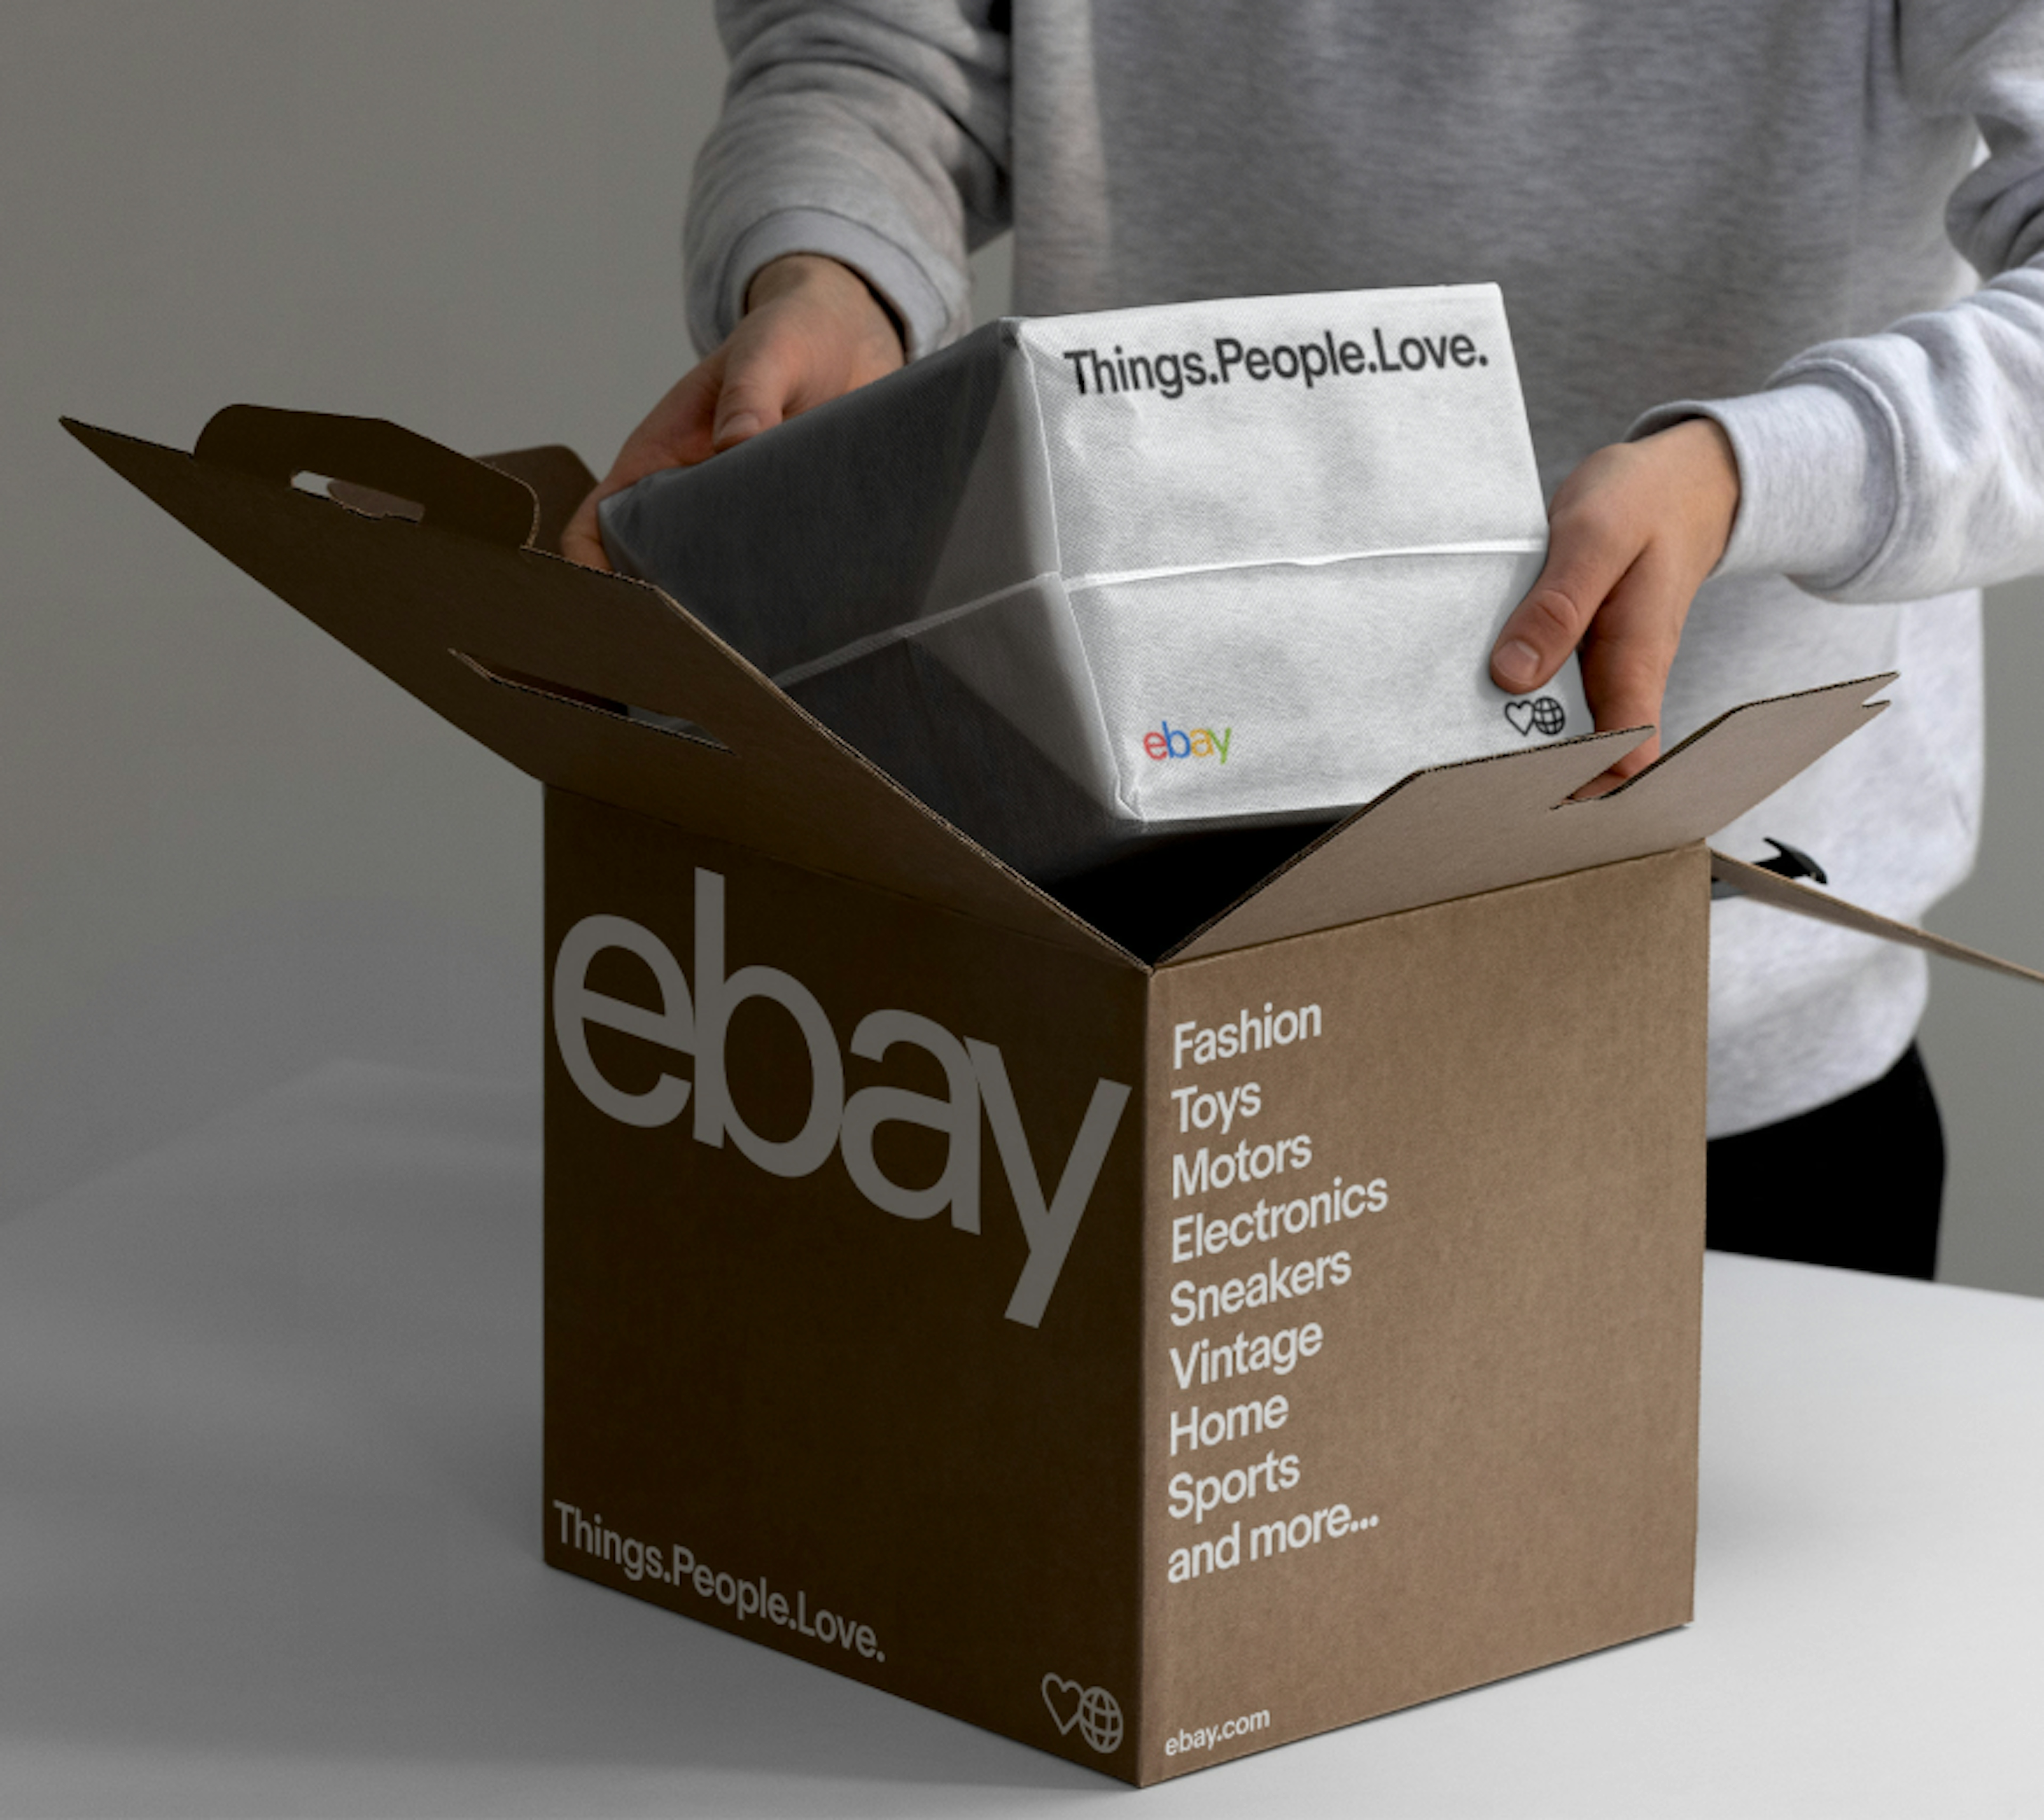 A person placing an item in a brown eBay box with white type on it. The Box has a large eBay logo, the tagline “Things.People.Love.” and the categories “fashion, toys, motors, electronics, sneakers, vintage, home, sports and more...” written out.